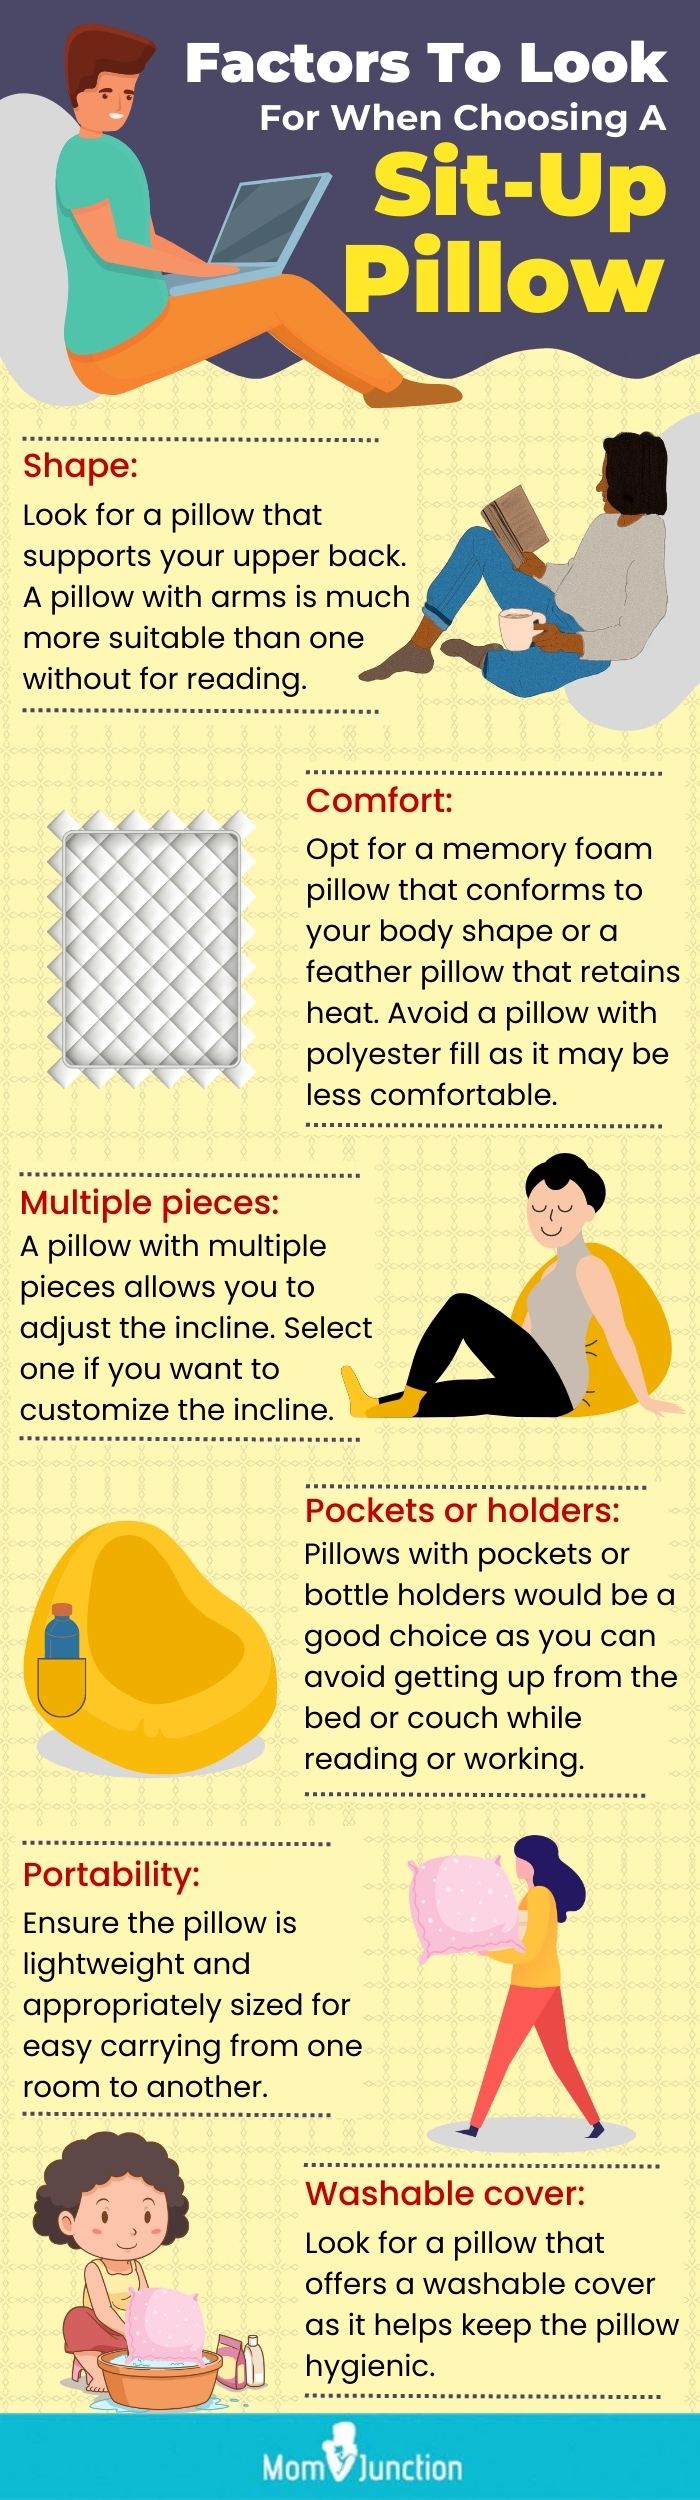 Factors To Look For When Choosing A Sit-Up Pillow (infographic)